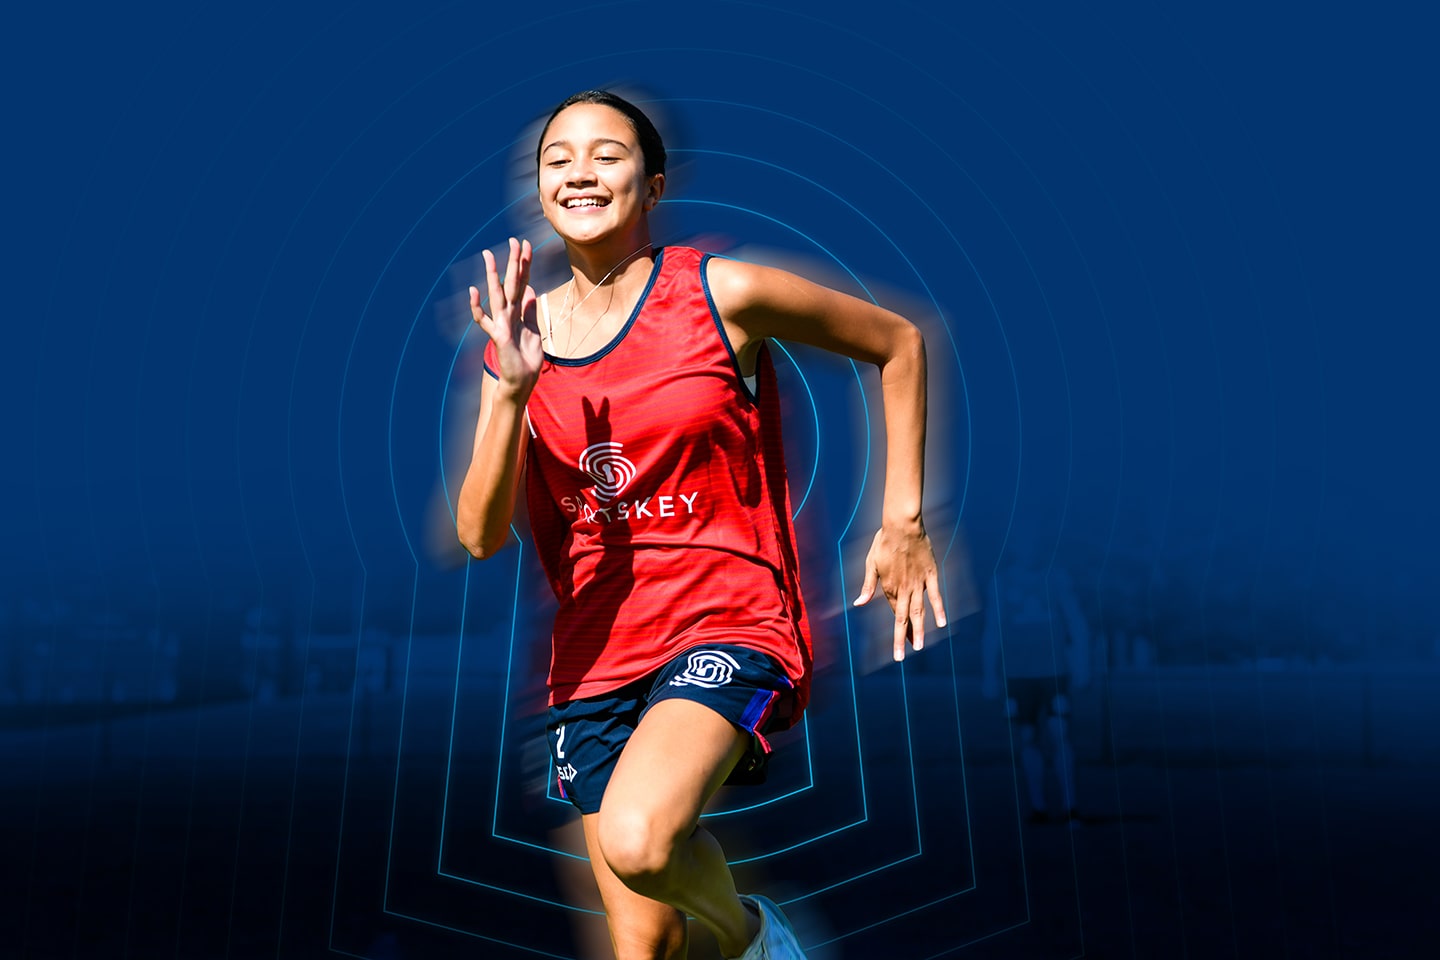 Young girl running and smiling during Sportskey test